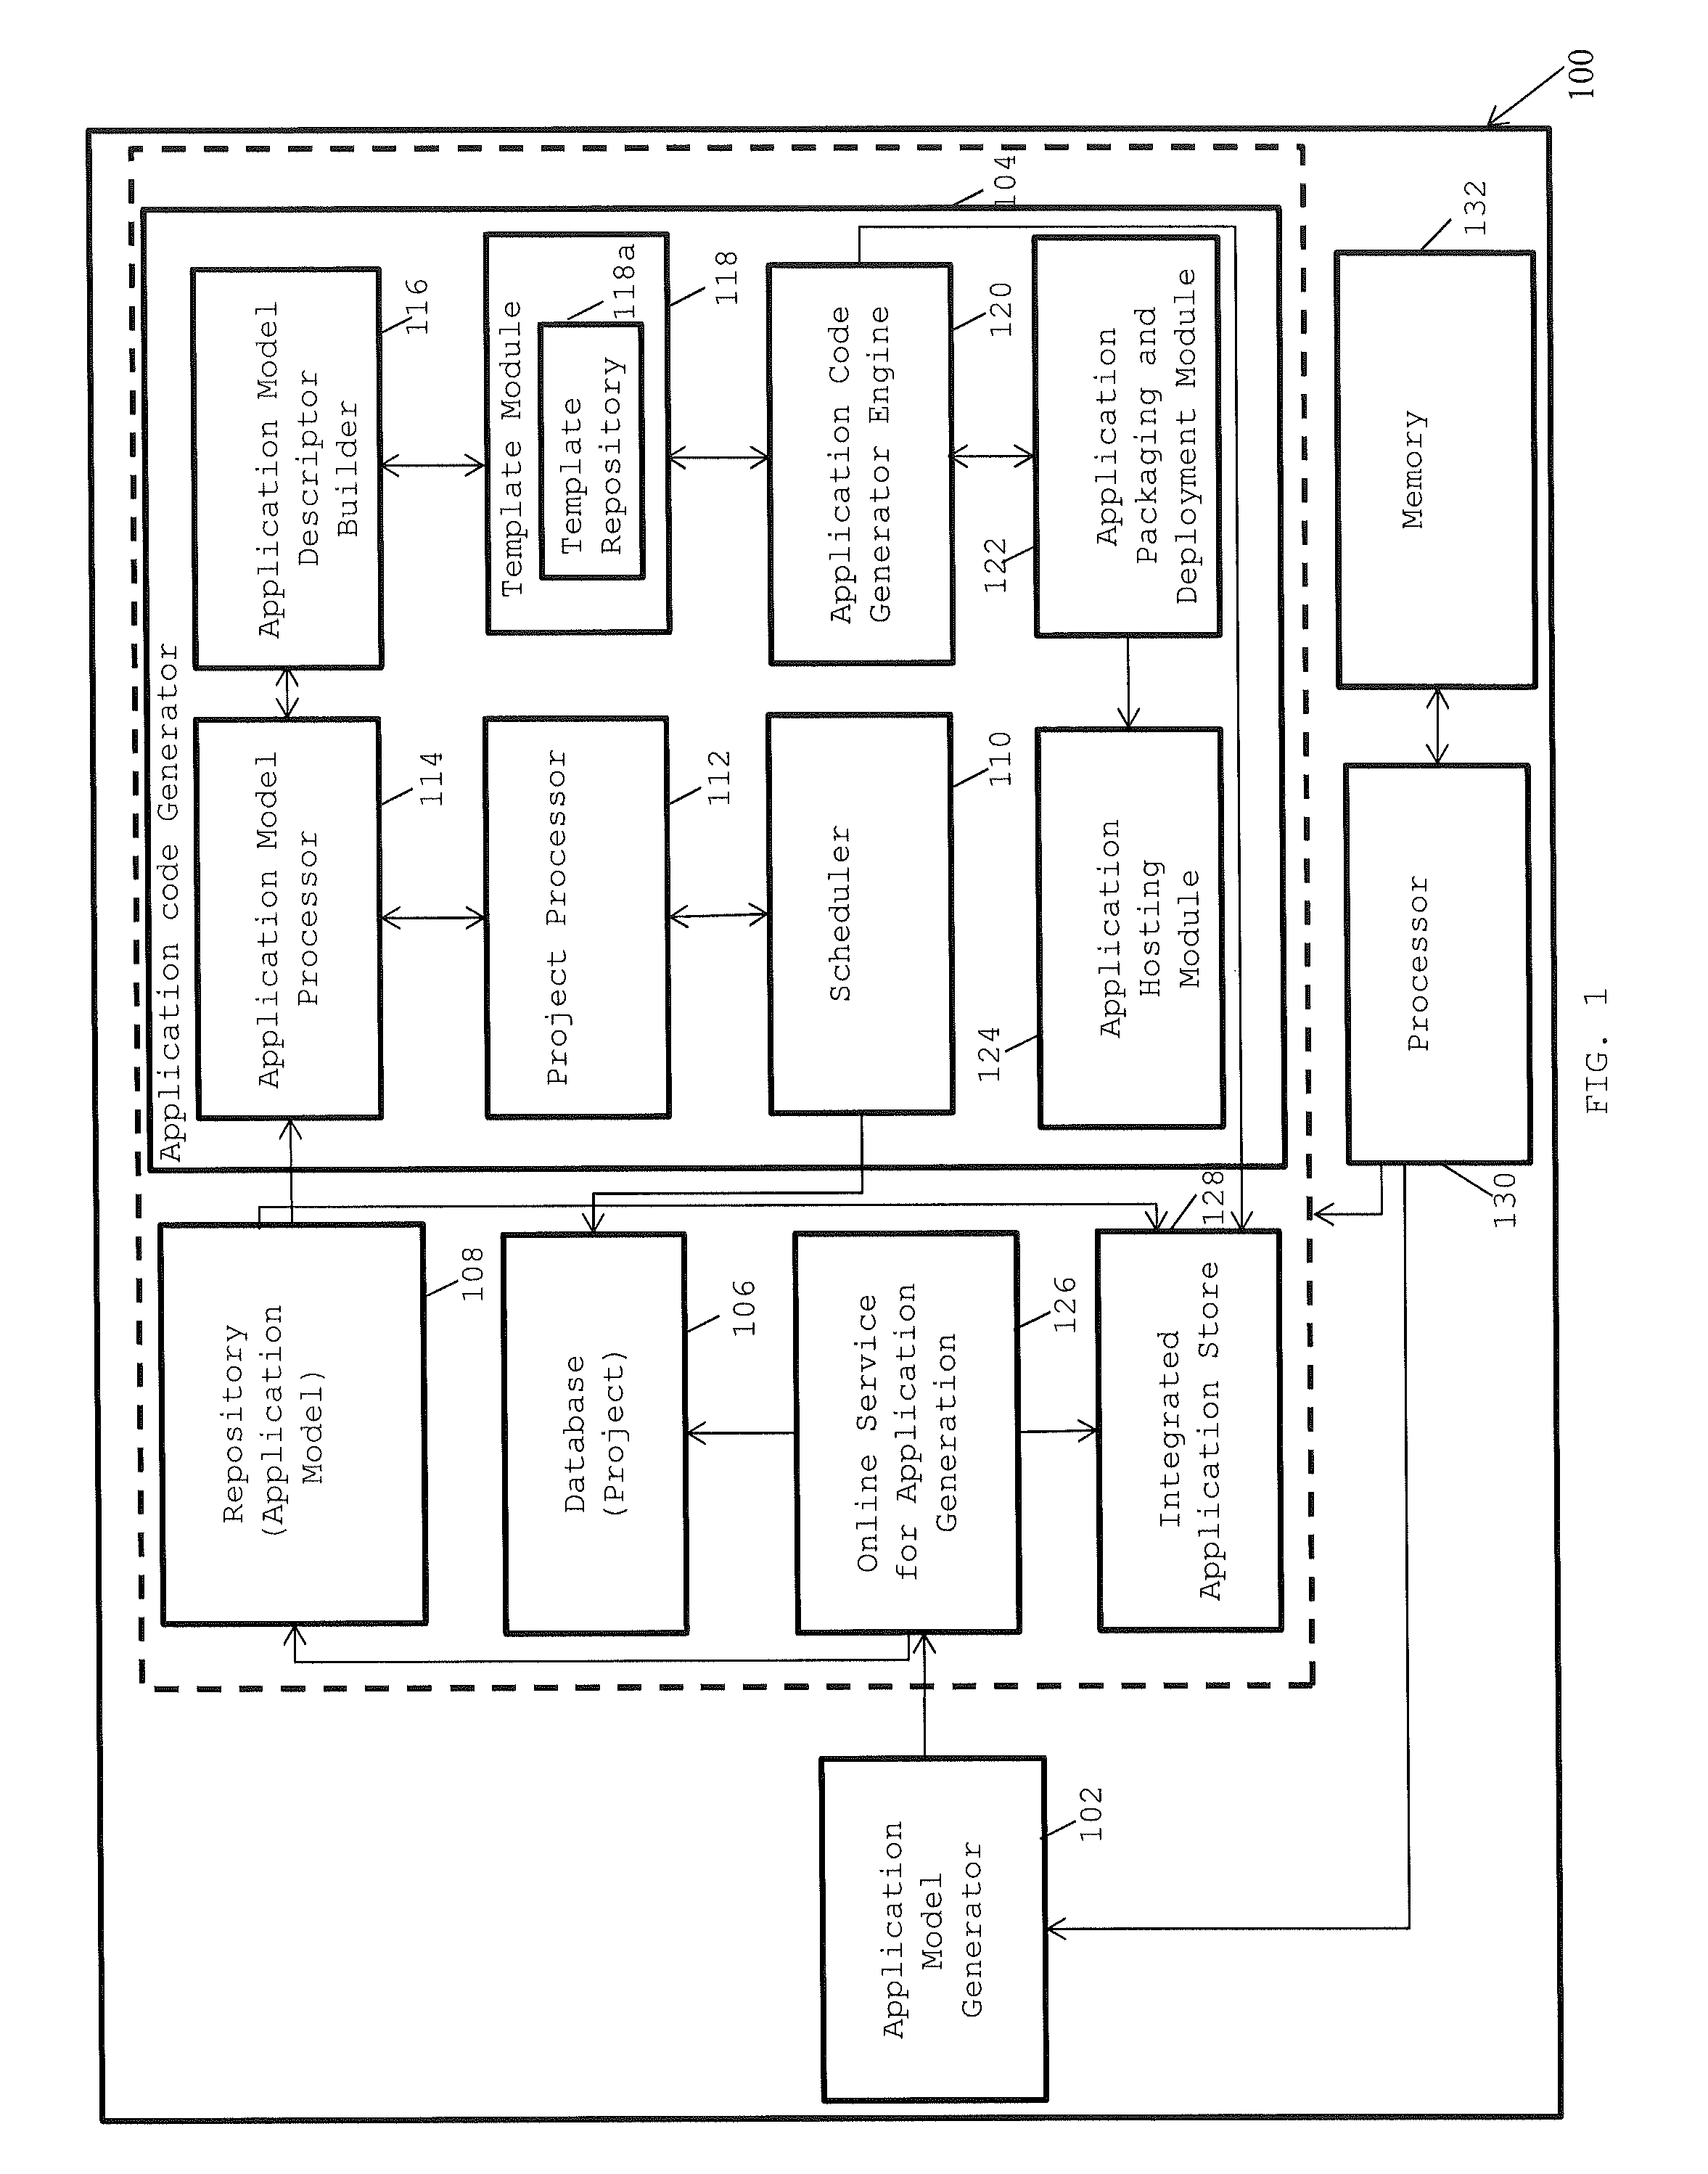 Method and system for facilitating rapid development of end-to-end software applications